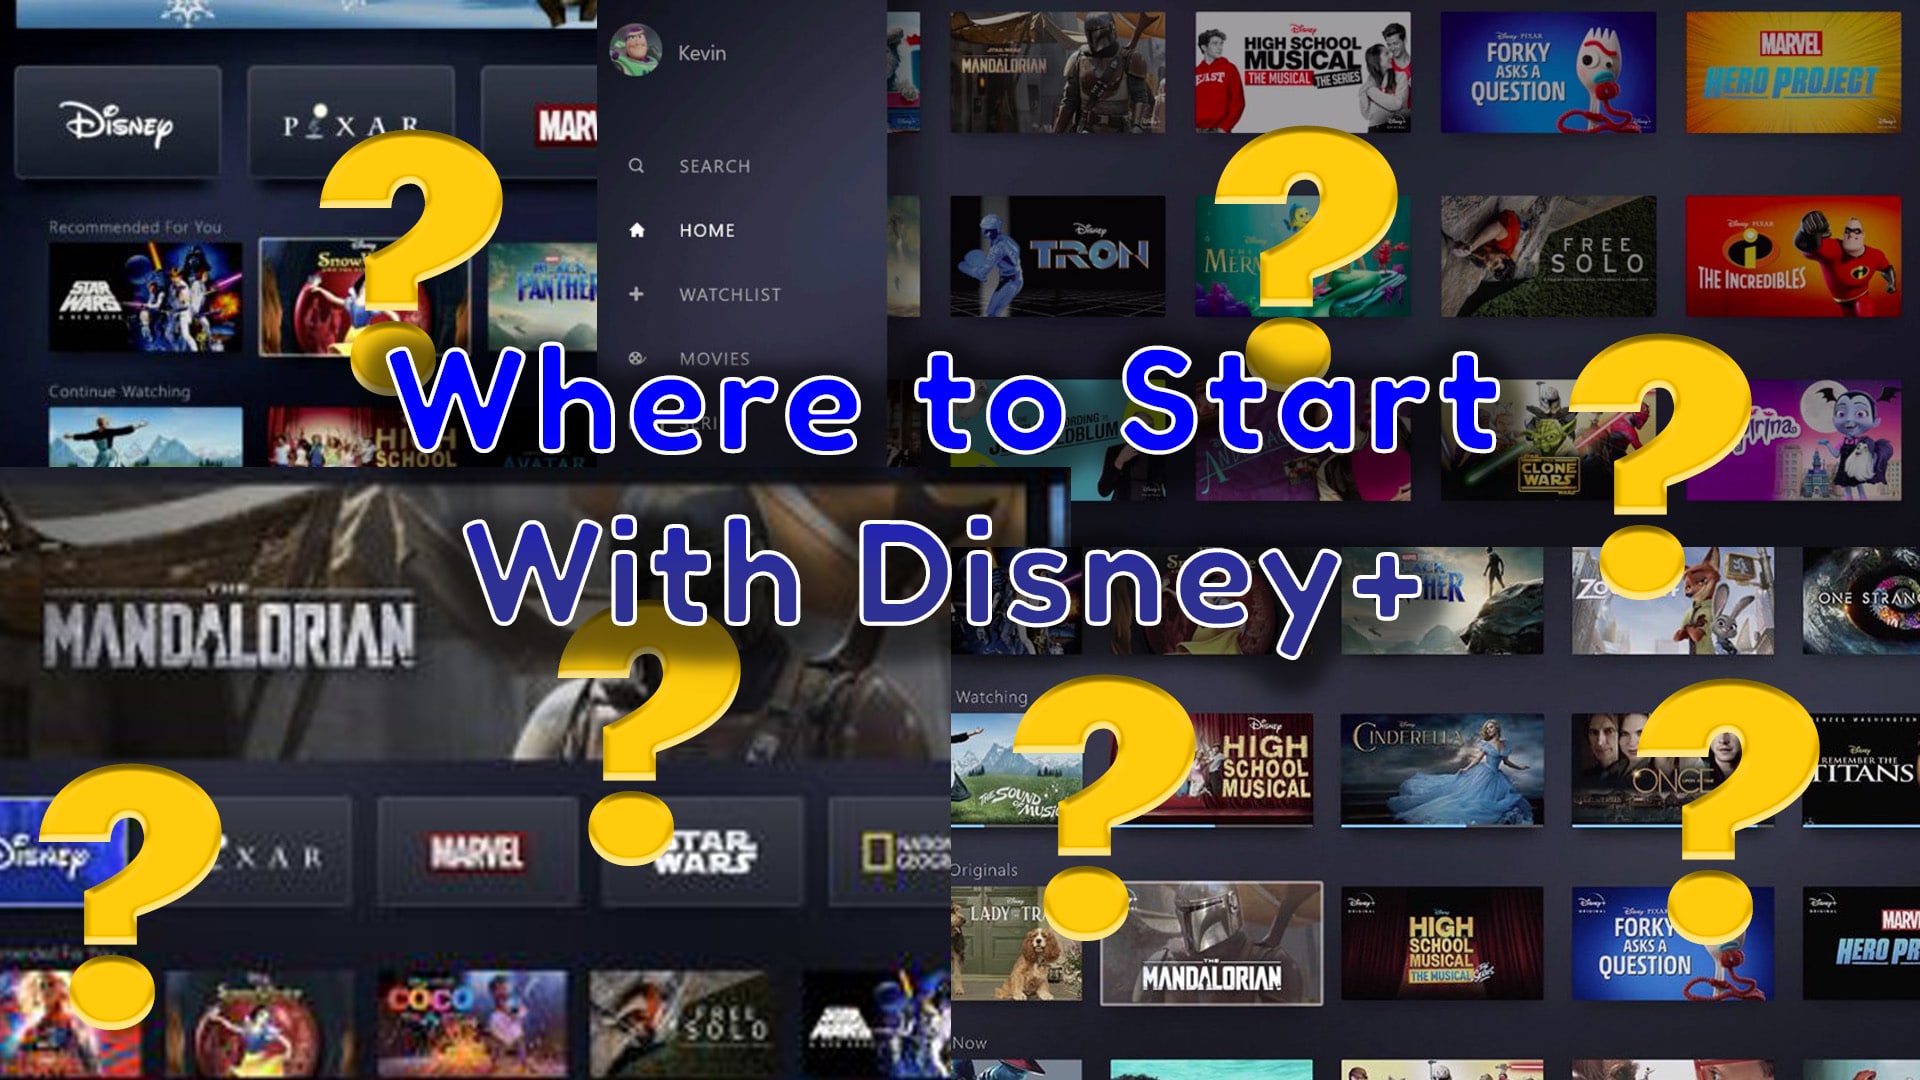 Overwhelmed with Disney+? Here are Some “Viewing Path” Suggestions to Get You Started